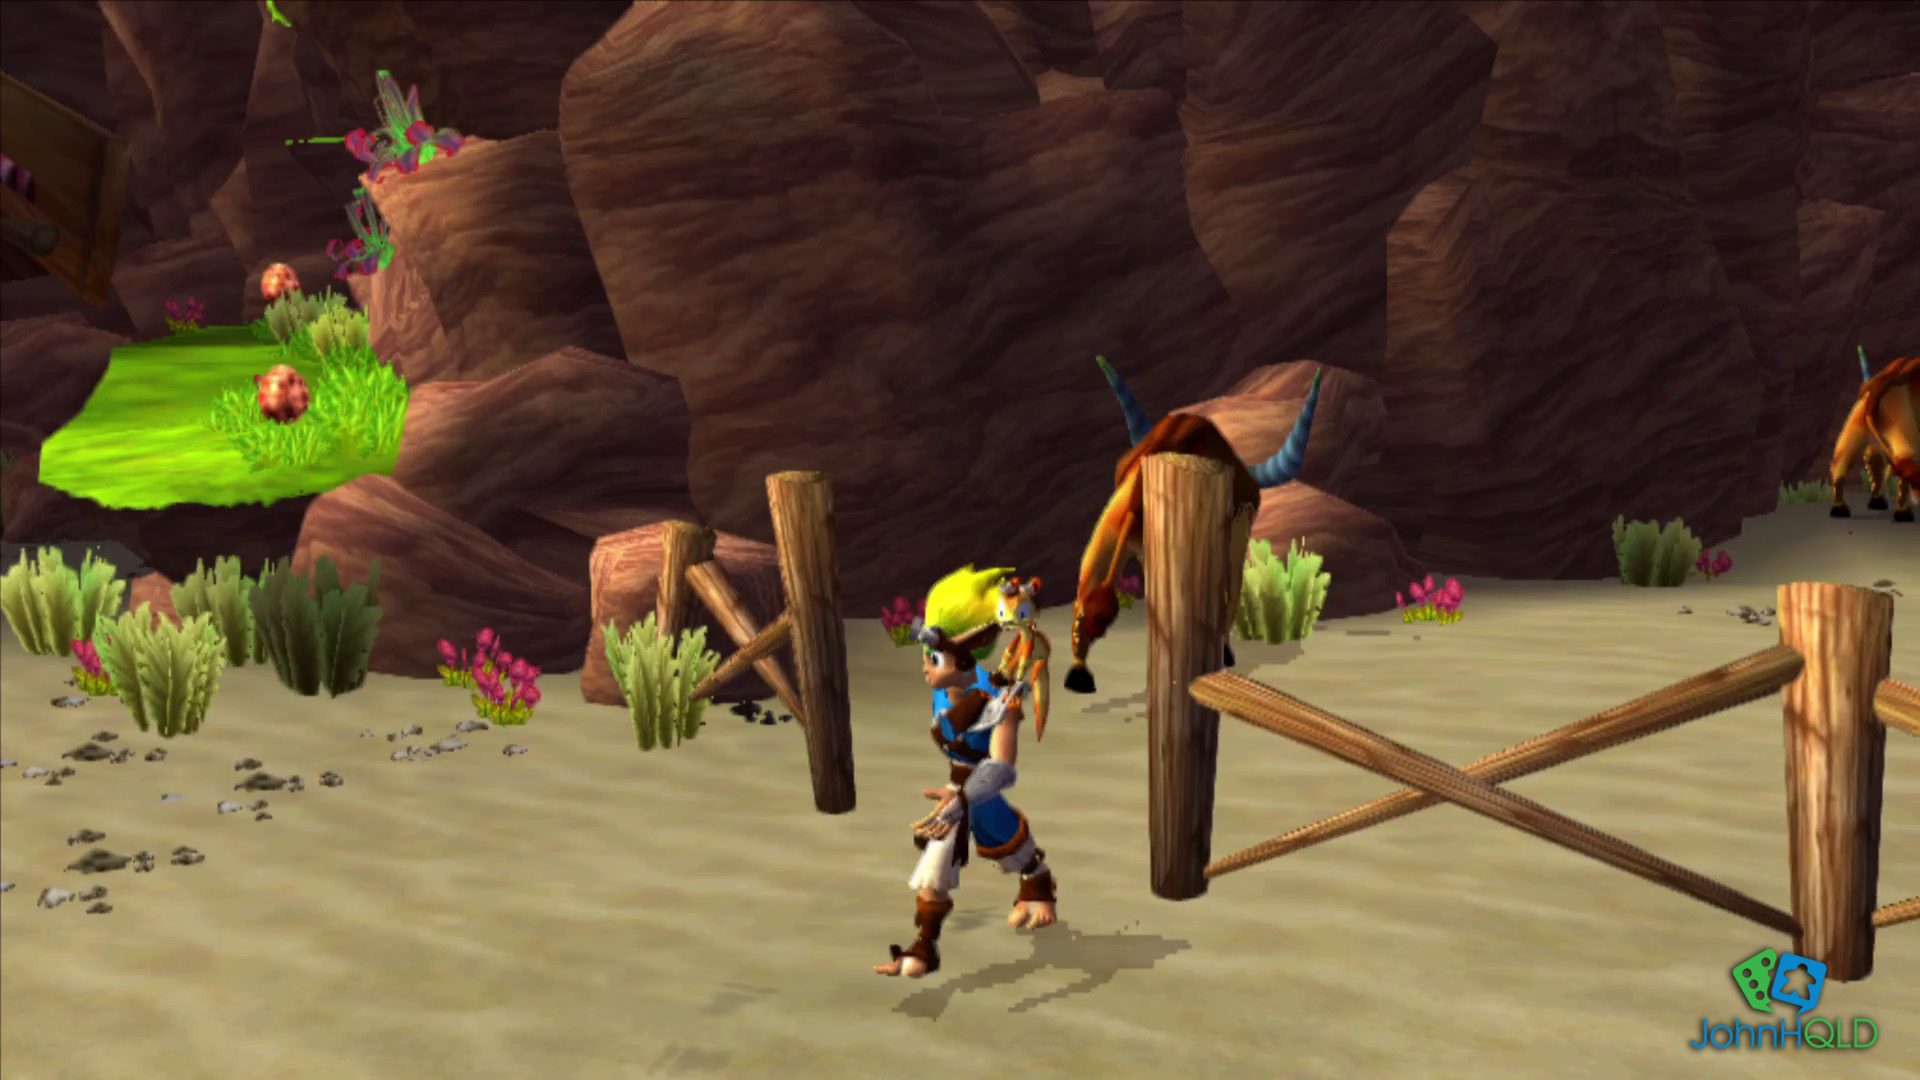 20220718 - Jak and Daxter The Precursor Legacy - Fetch quests have not changed